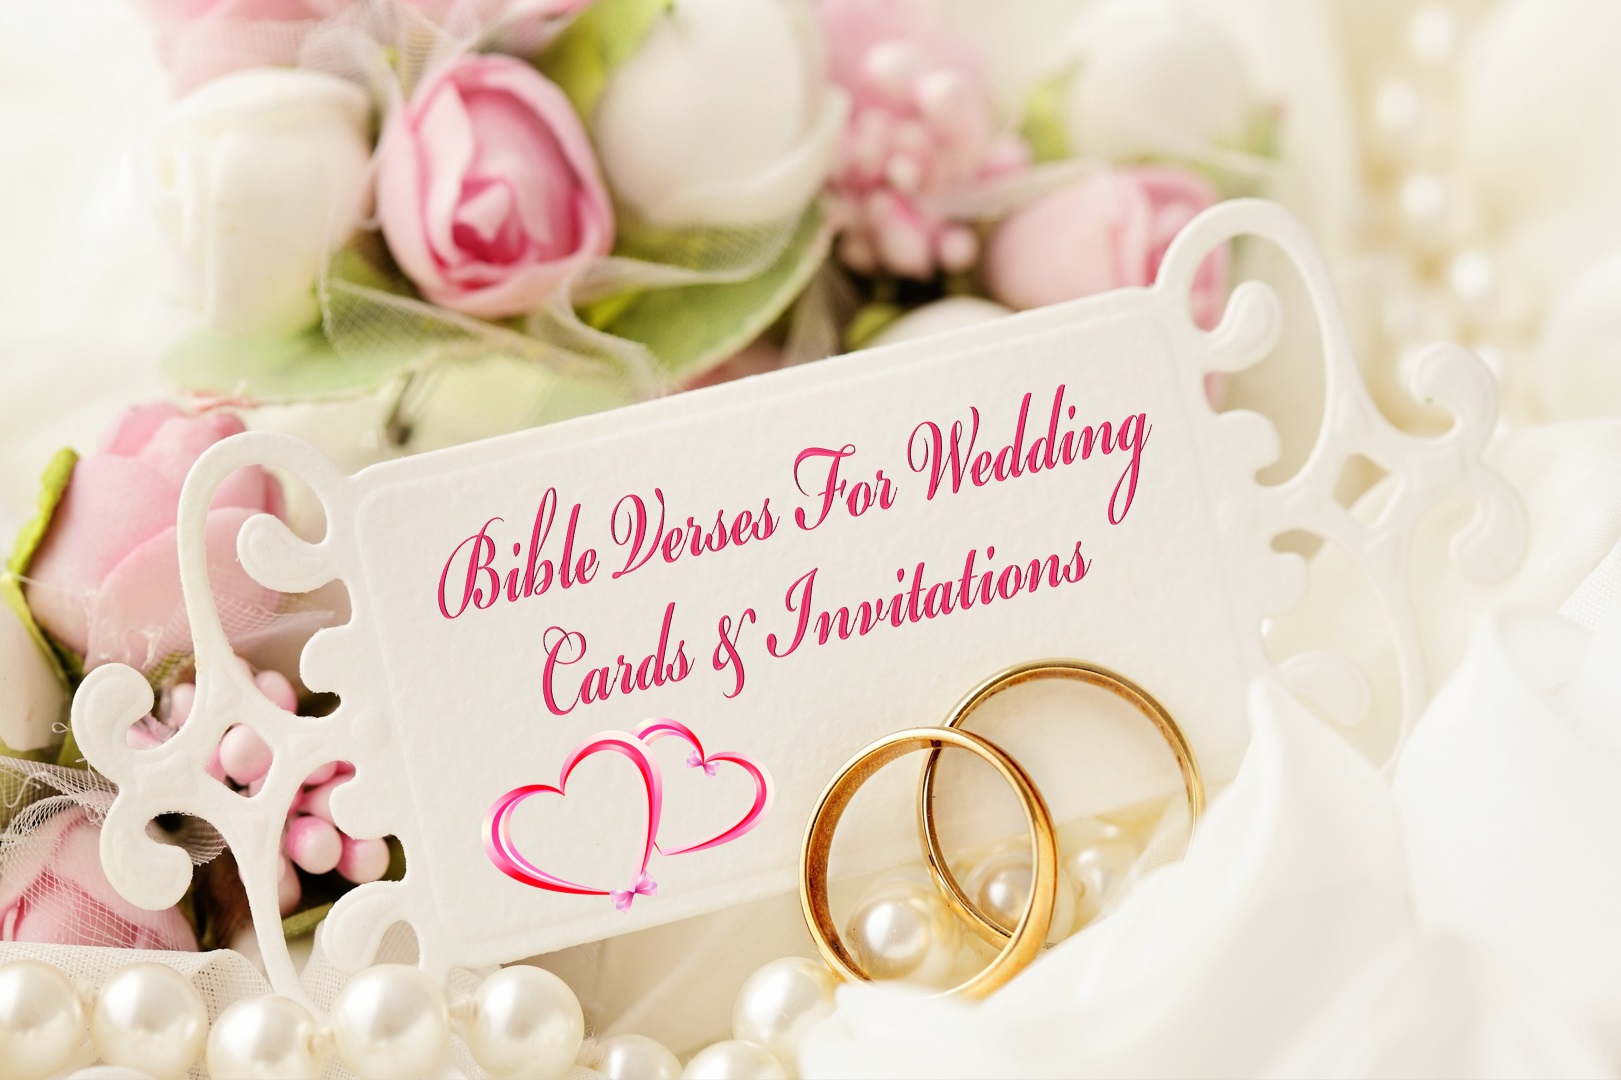 30+ Best Bible Verses For Wedding Cards And Invitations | SuperbWIshes